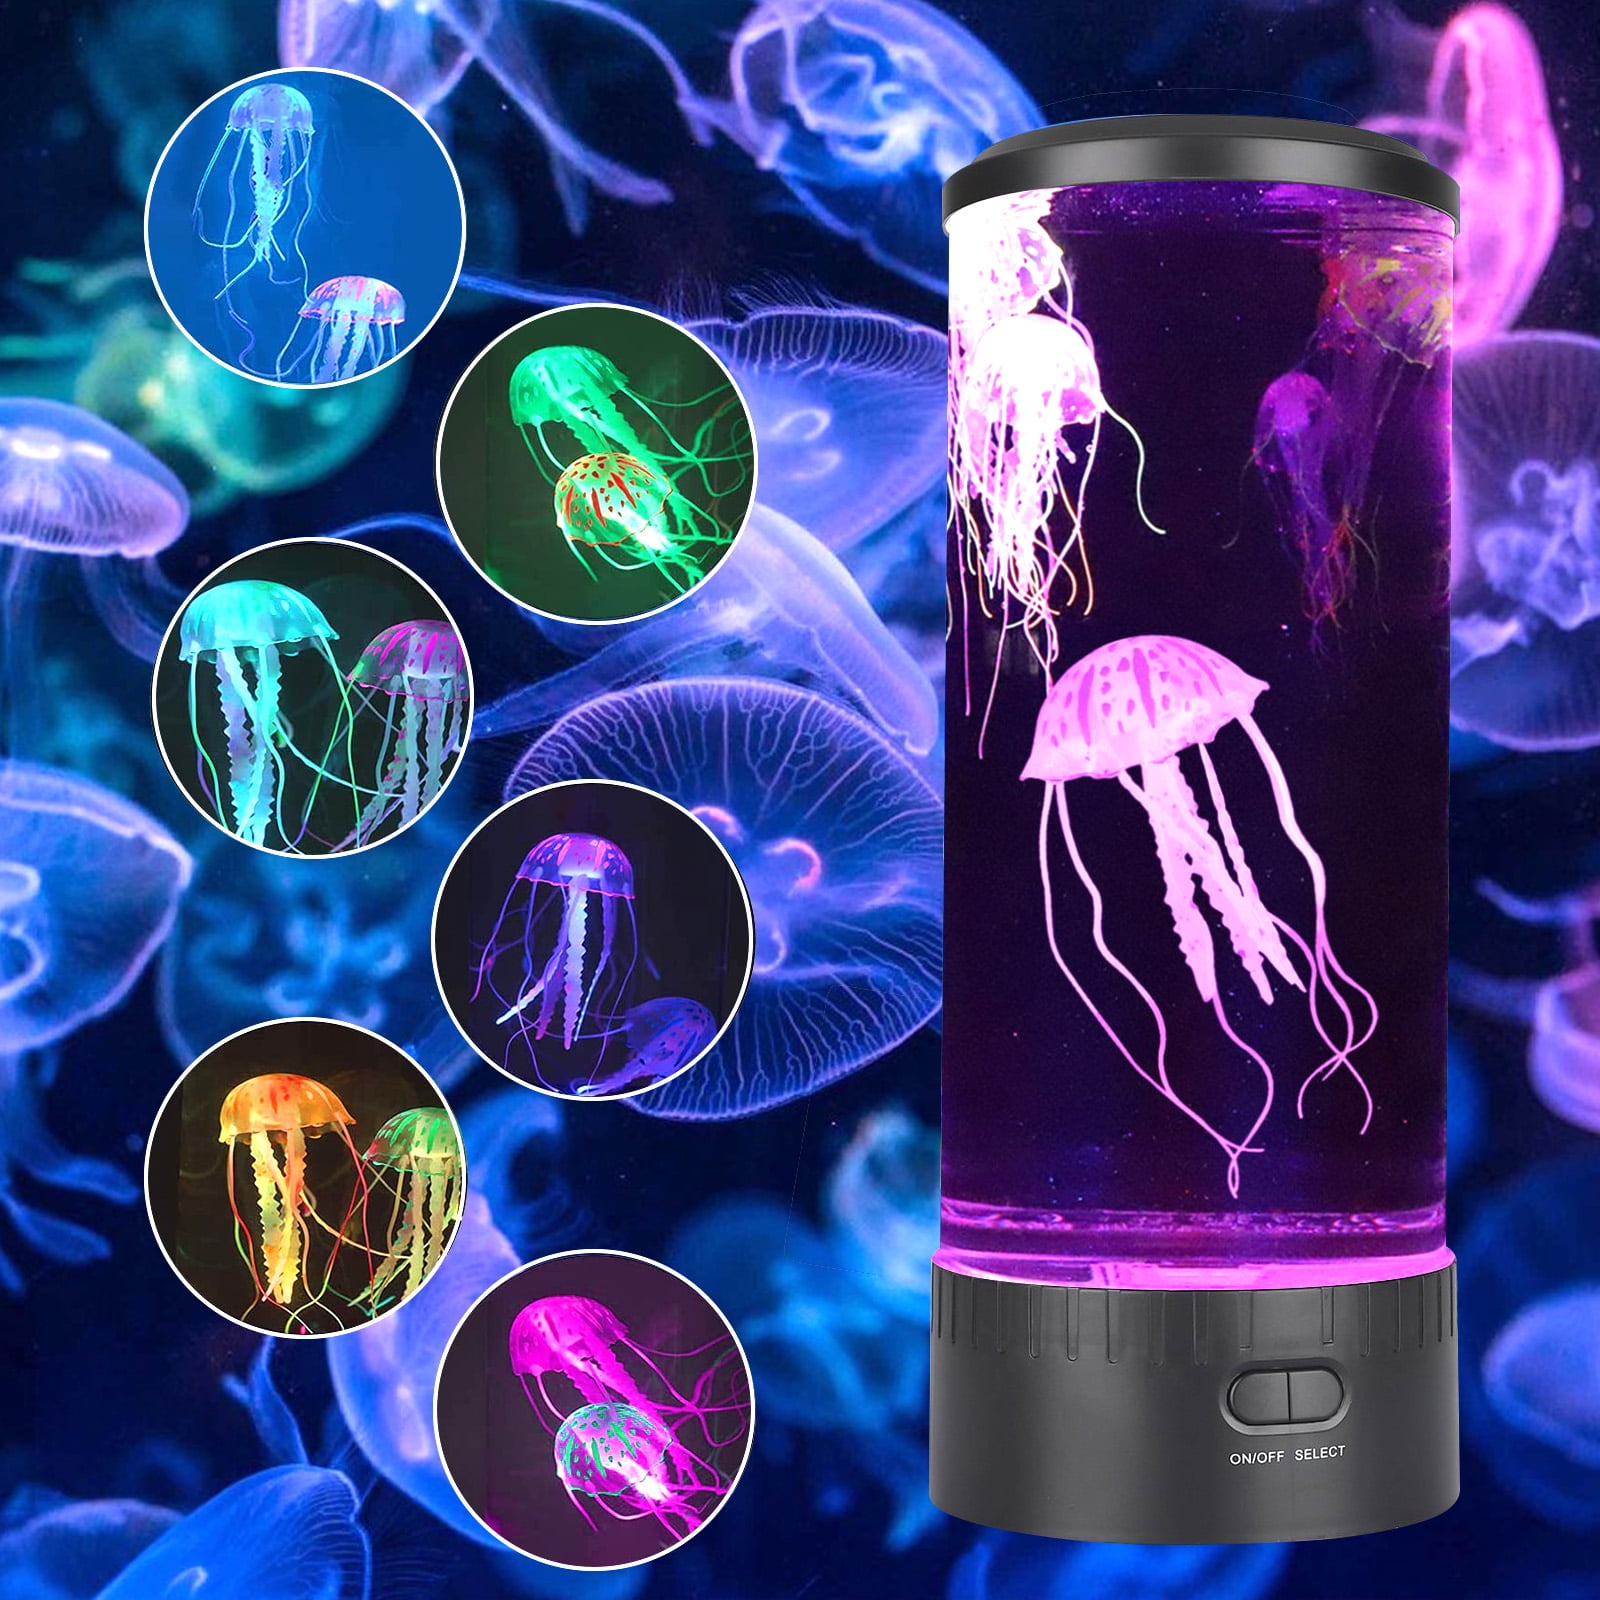 LED Fantasy Jellyfish Lava Lamp Aquarium, EEEkit Electric Round Jellyfish  Tank Mood Light with 3 Fake Glowing Jelly Fish, 5 Color Changing Effects  with Timer, Night Light Gift for Kids Home Decor -